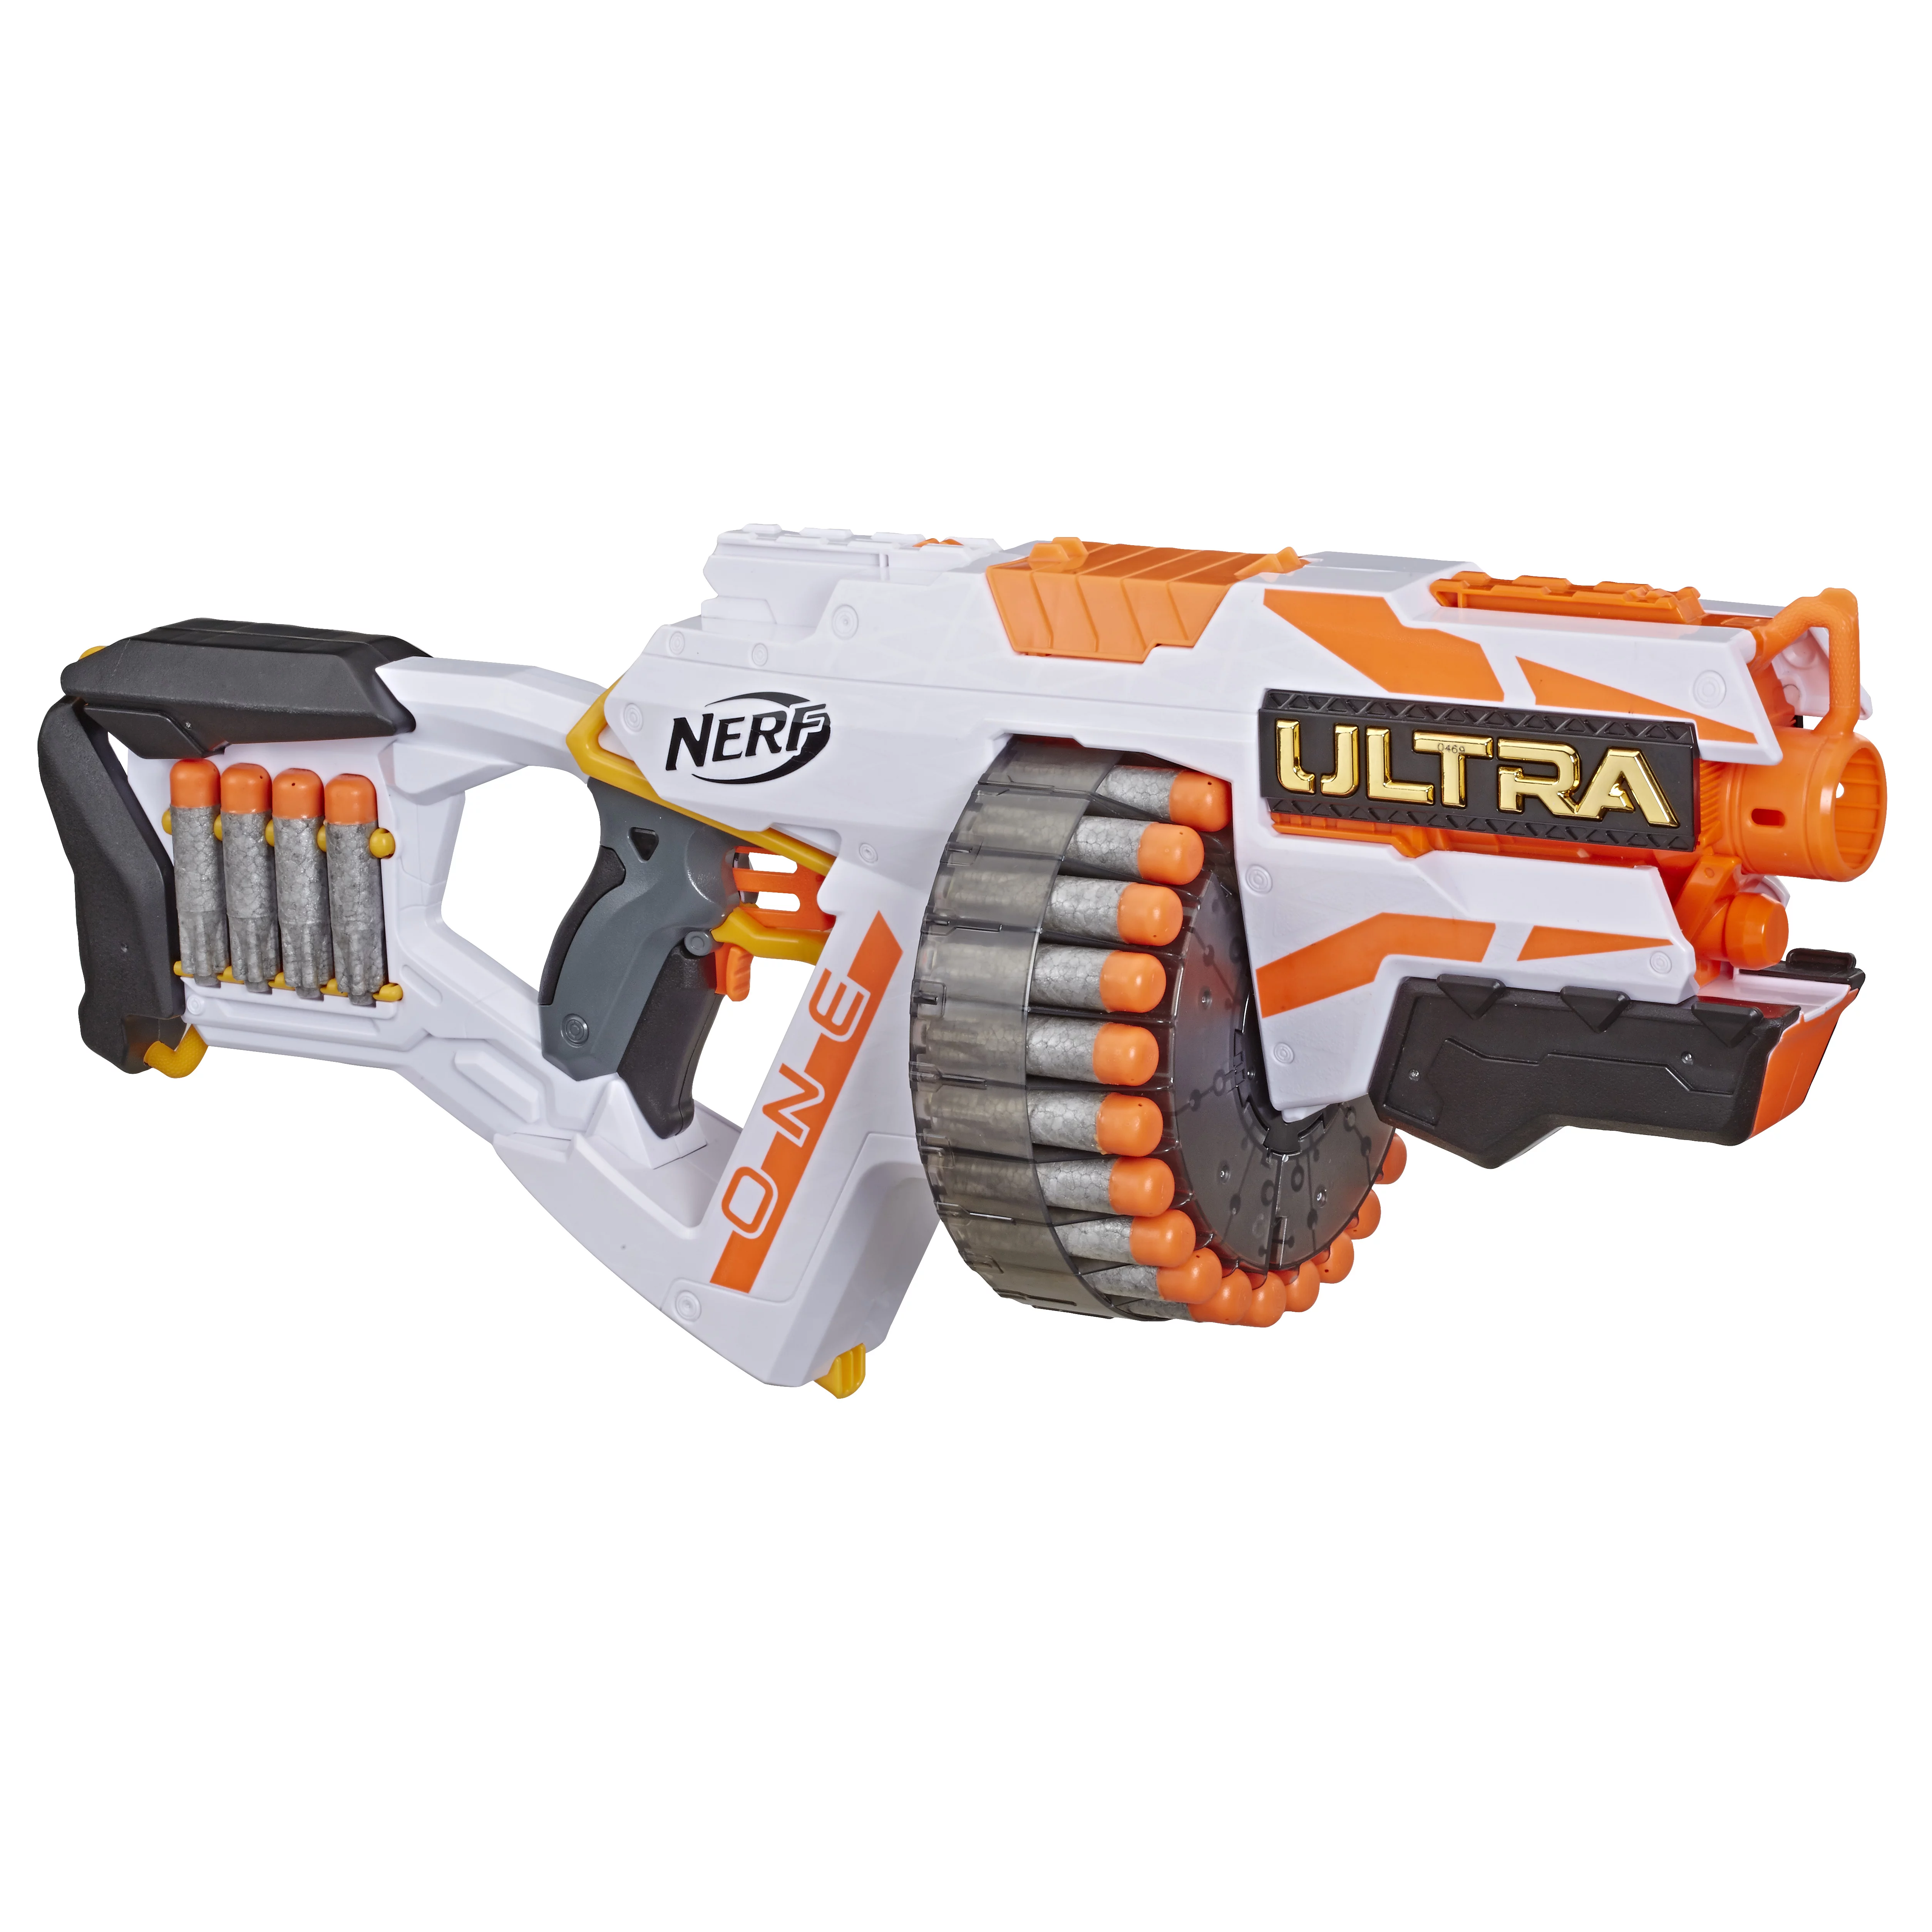 Nerf Ultra One Motorized Blaster, Includes 25 Official Nerf Ultra Darts